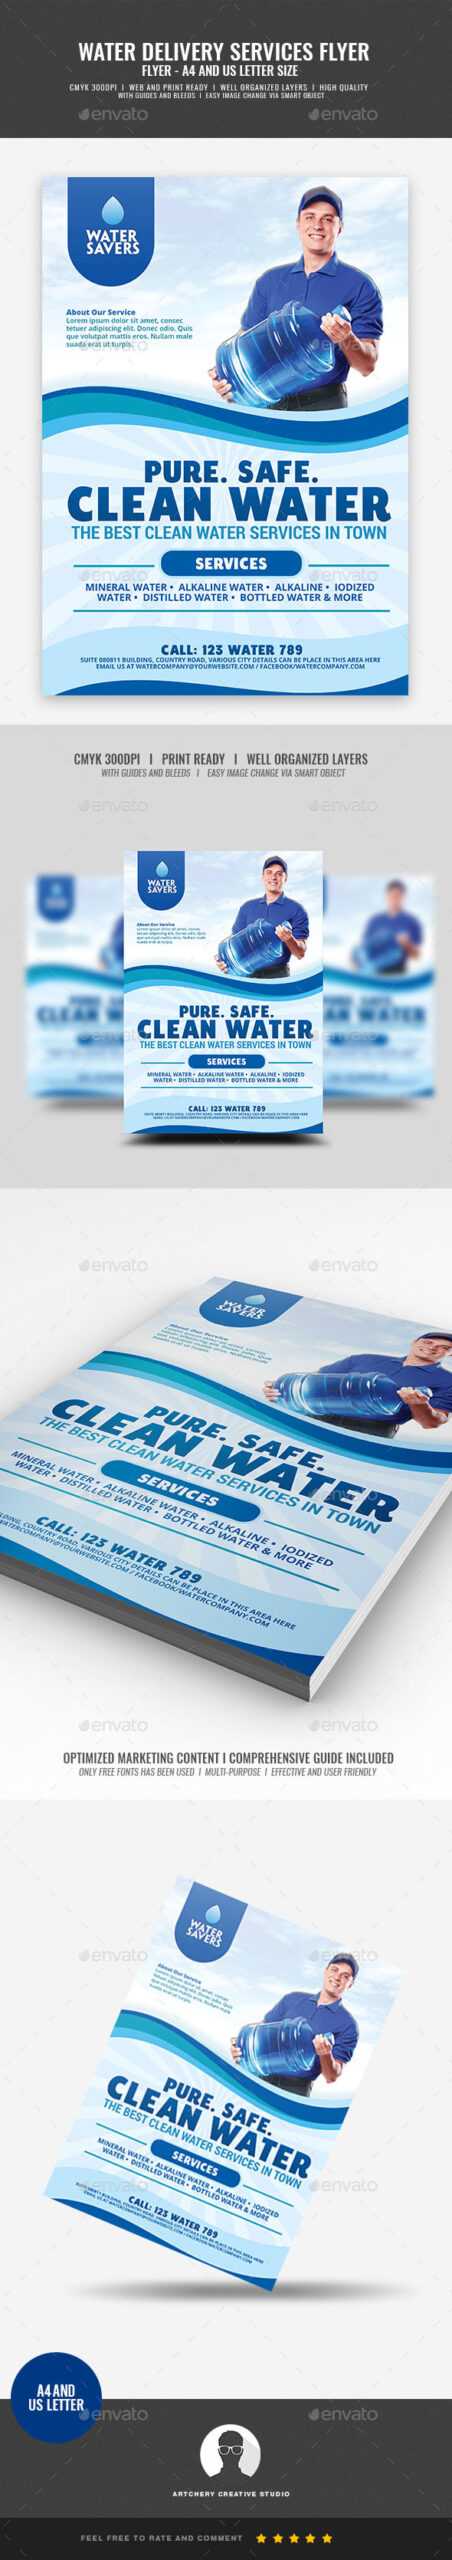 Delivery Flyer Graphics, Designs & Templates From Graphicriver Throughout Delivery Flyer Template